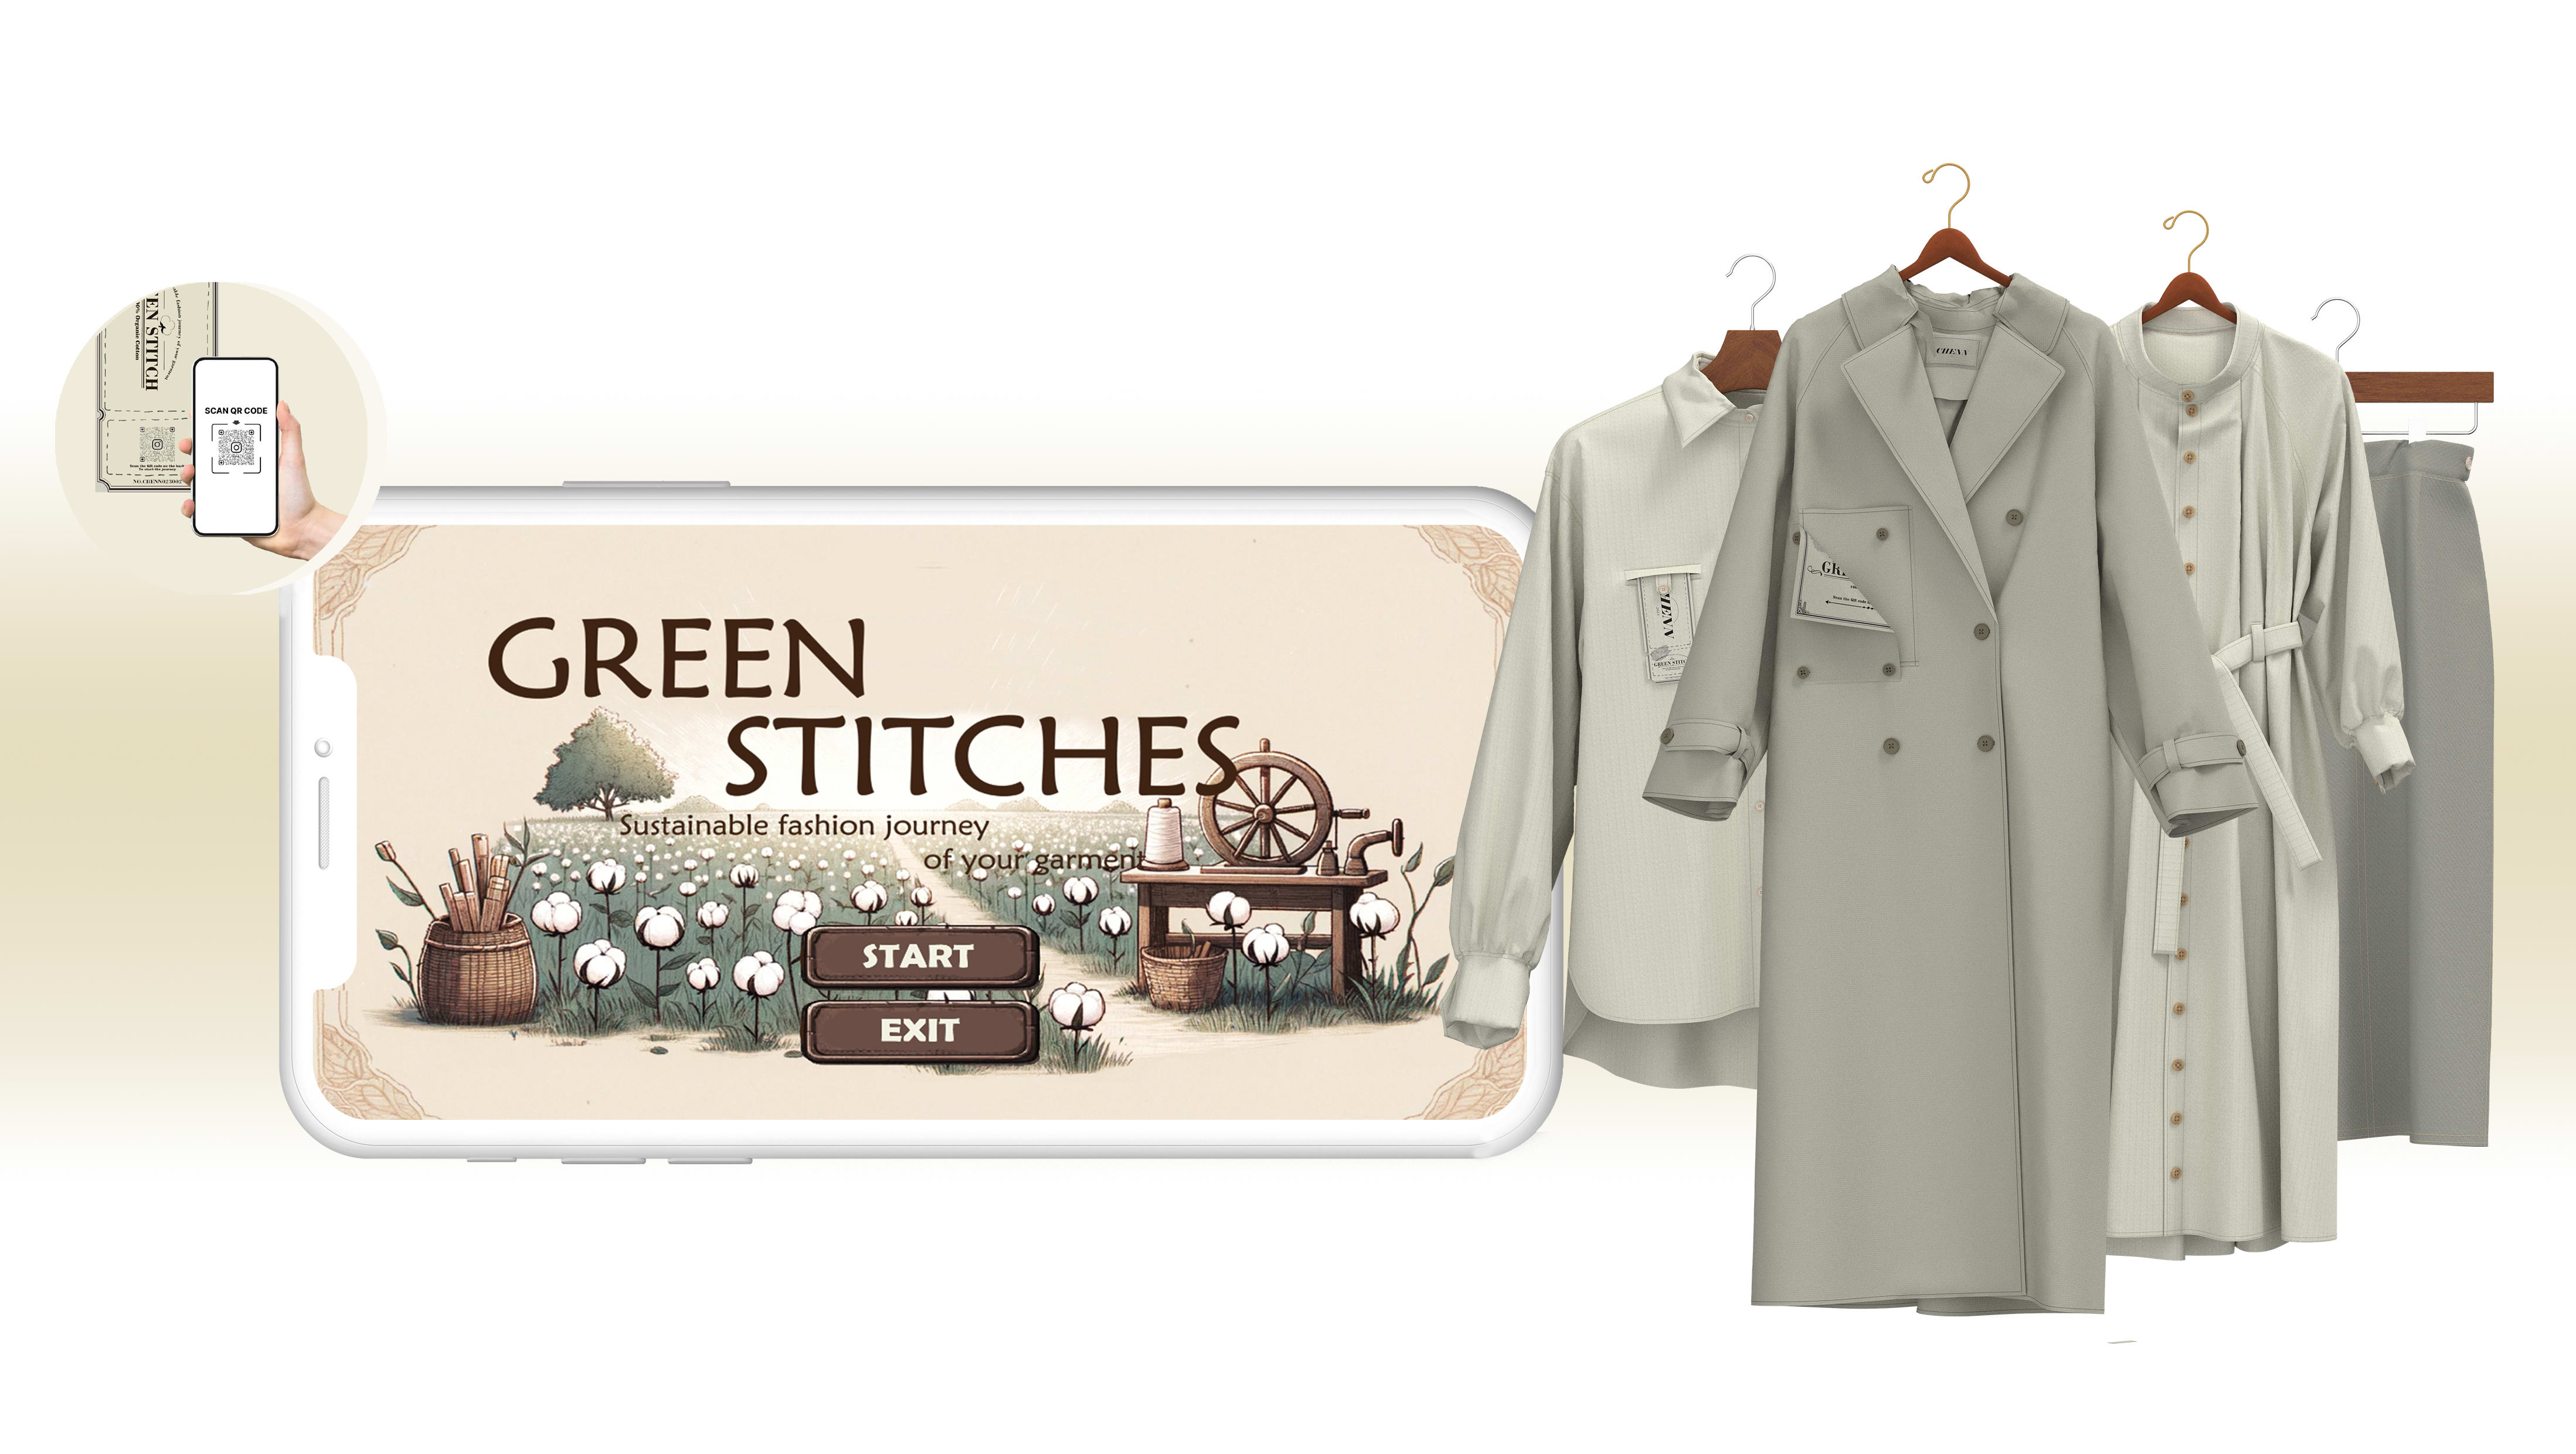 GREEN STITCHES: Sustainable Fashion Journey Game